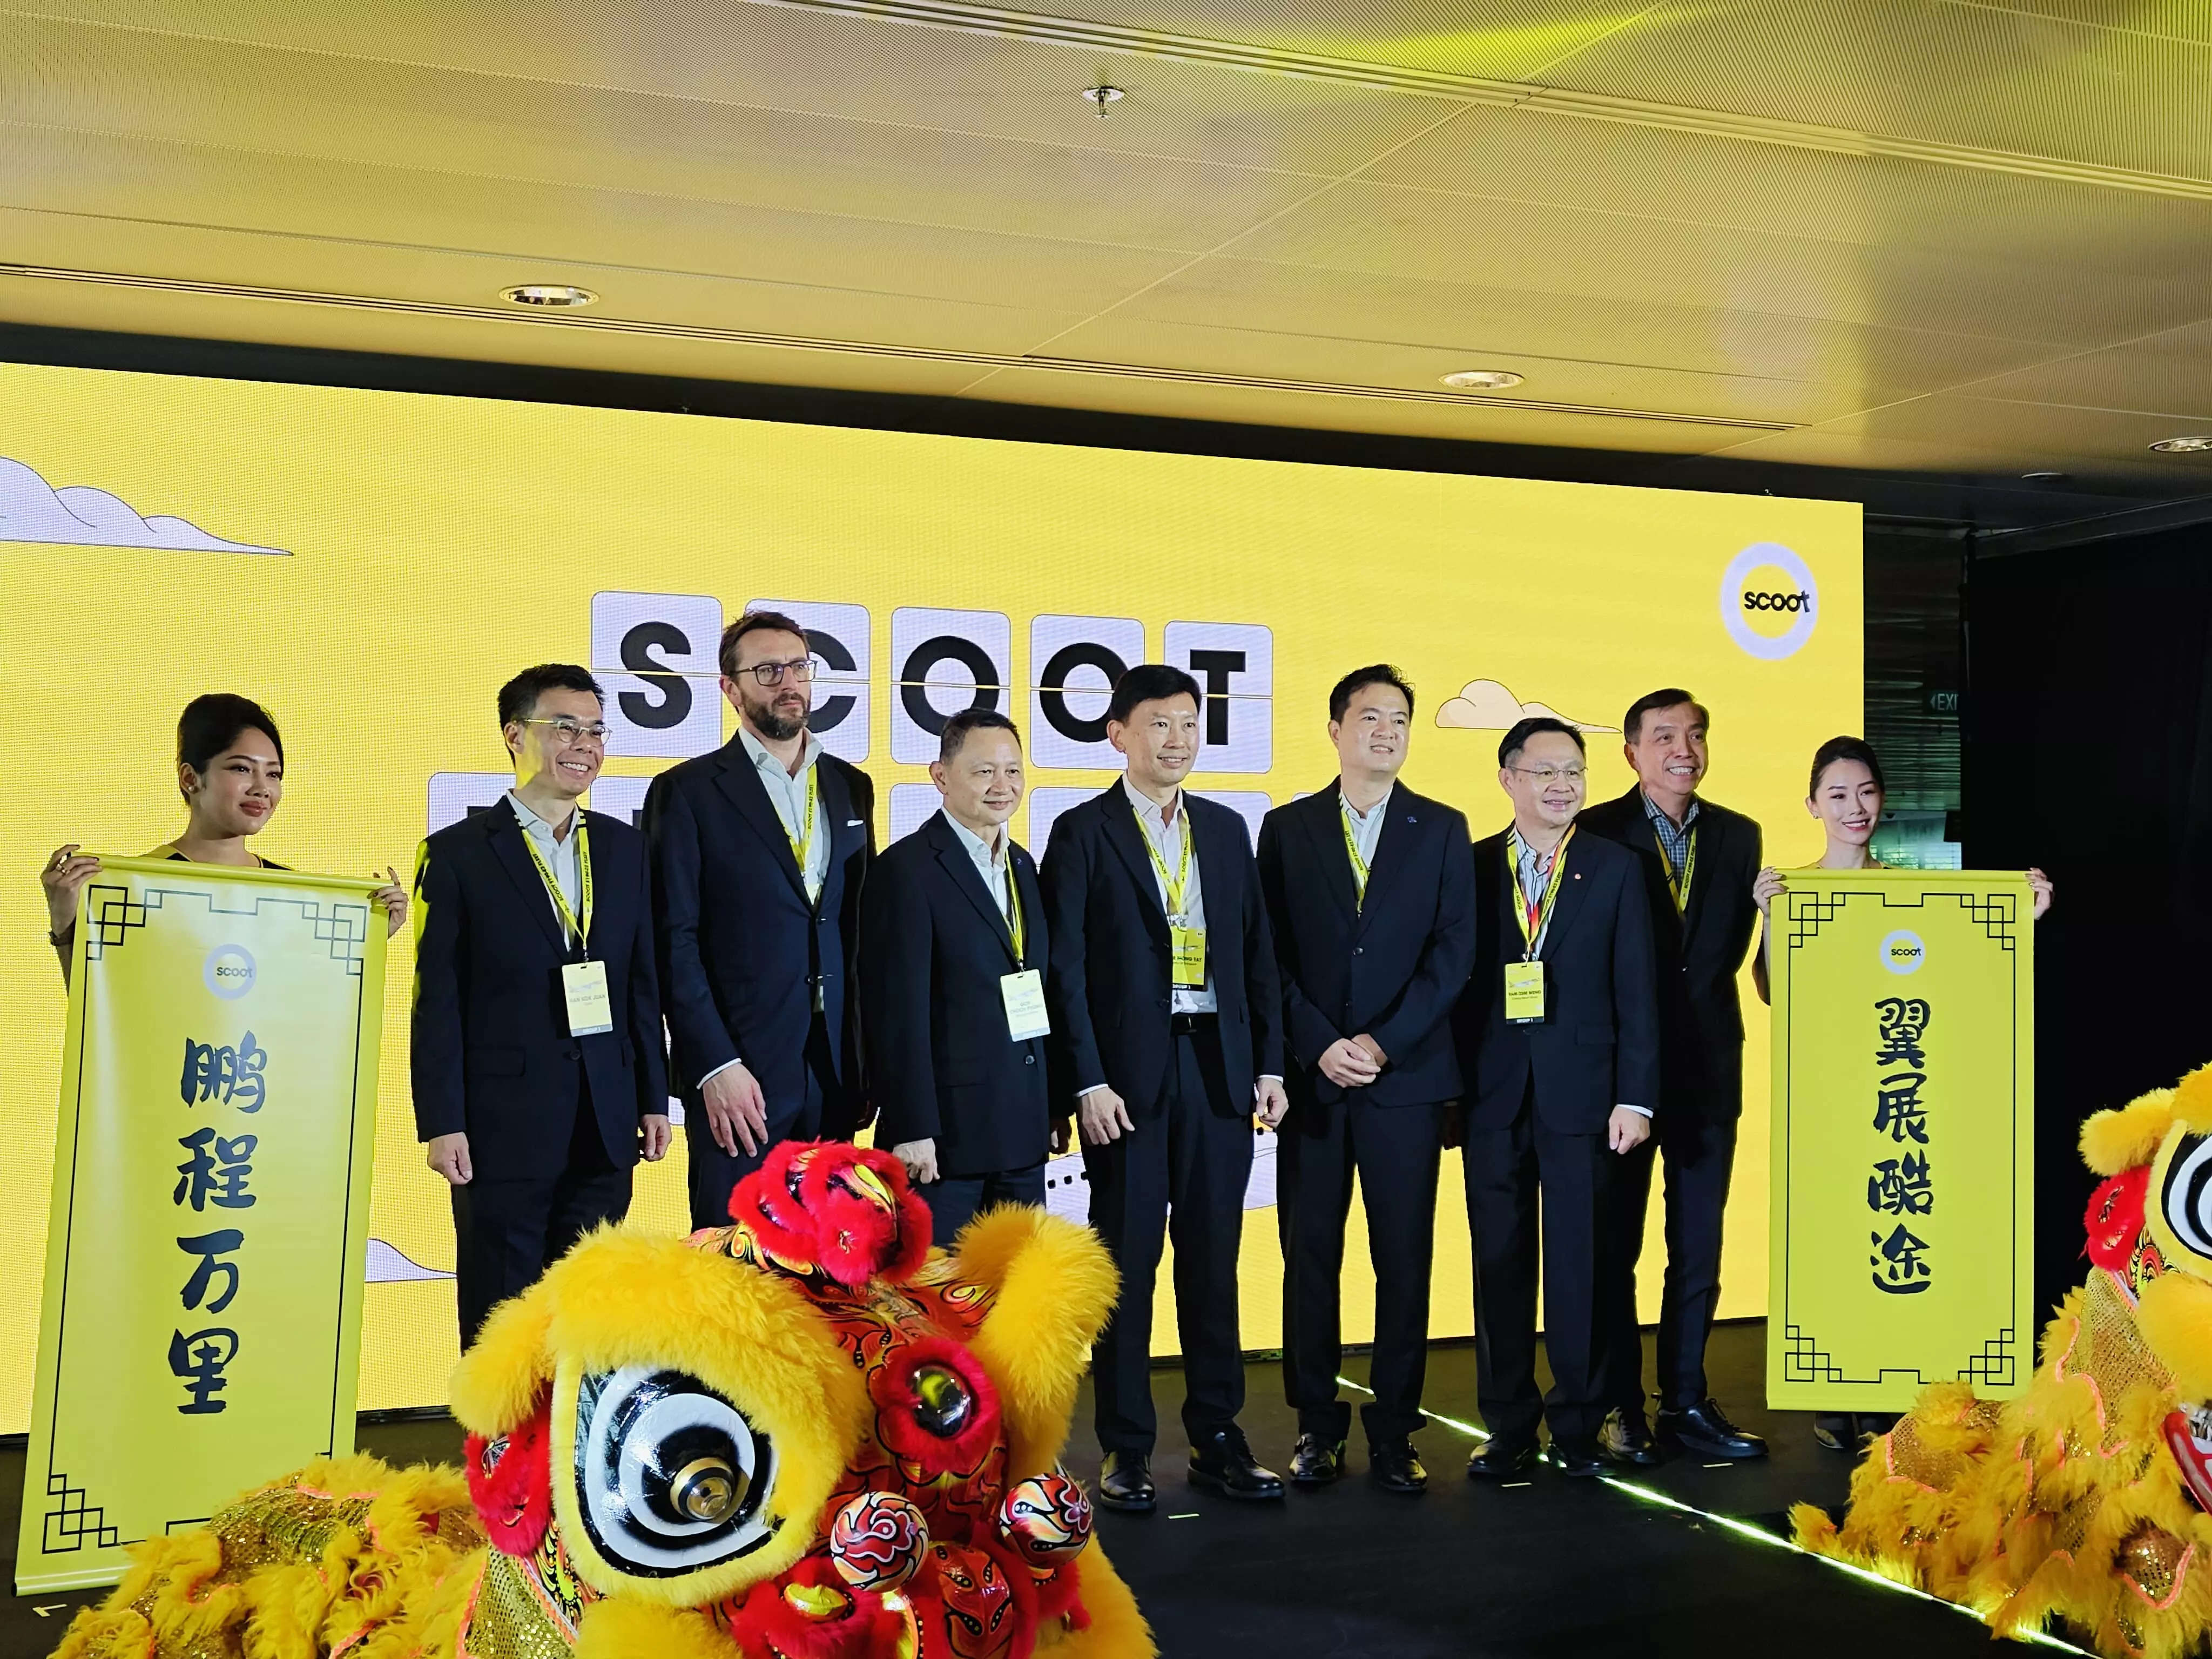 Southeast Asia's first Embraer aircraft takes off on Scoot from Singapore